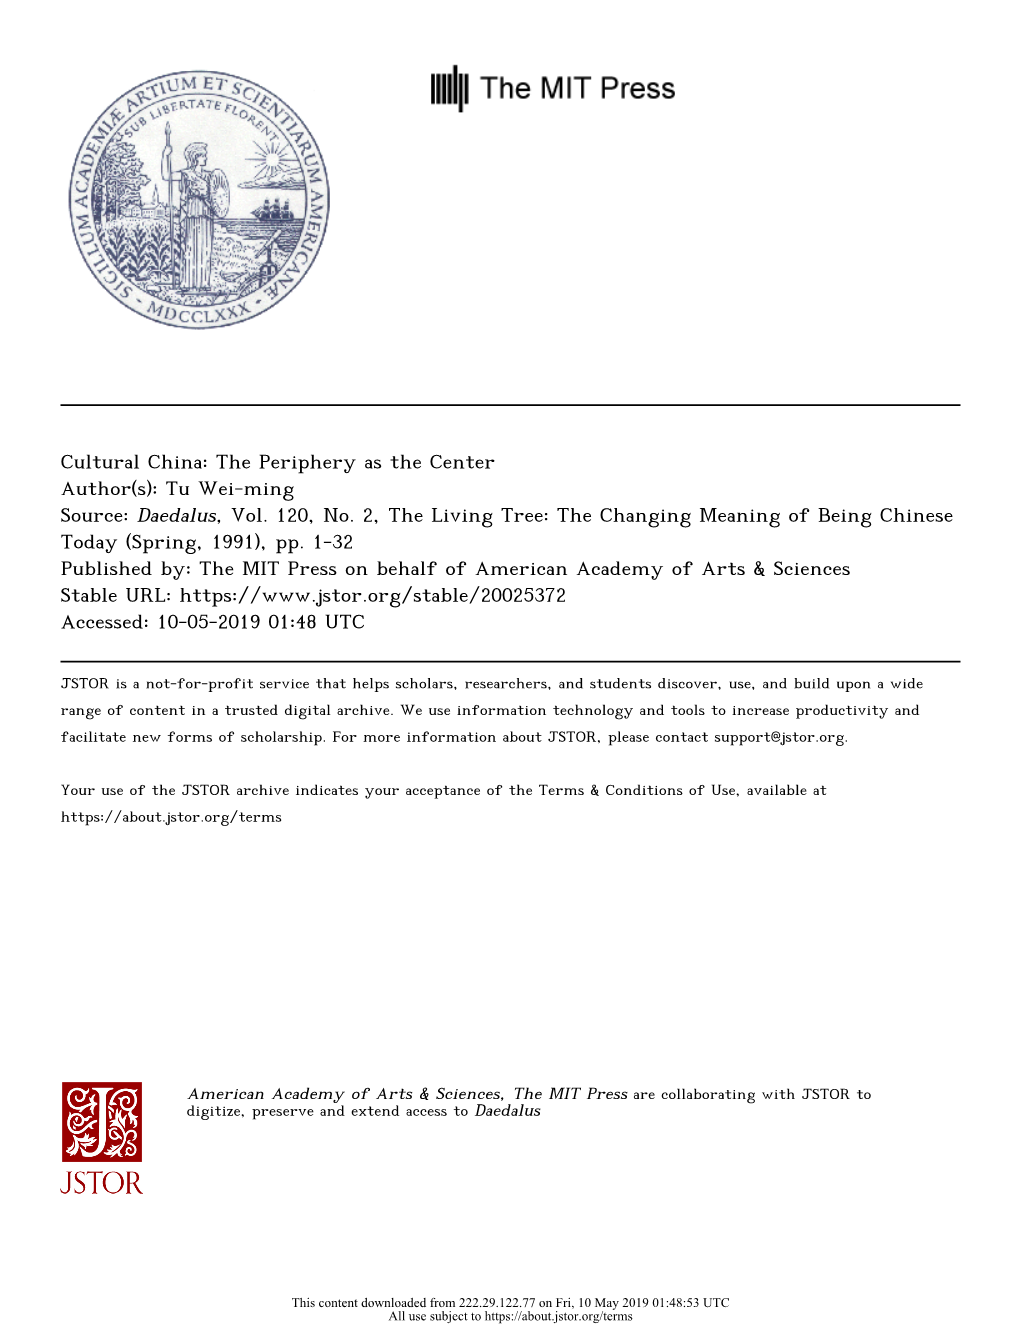 Cultural China: the Periphery As the Center Author(S): Tu Wei-Ming Source: Daedalus, Vol